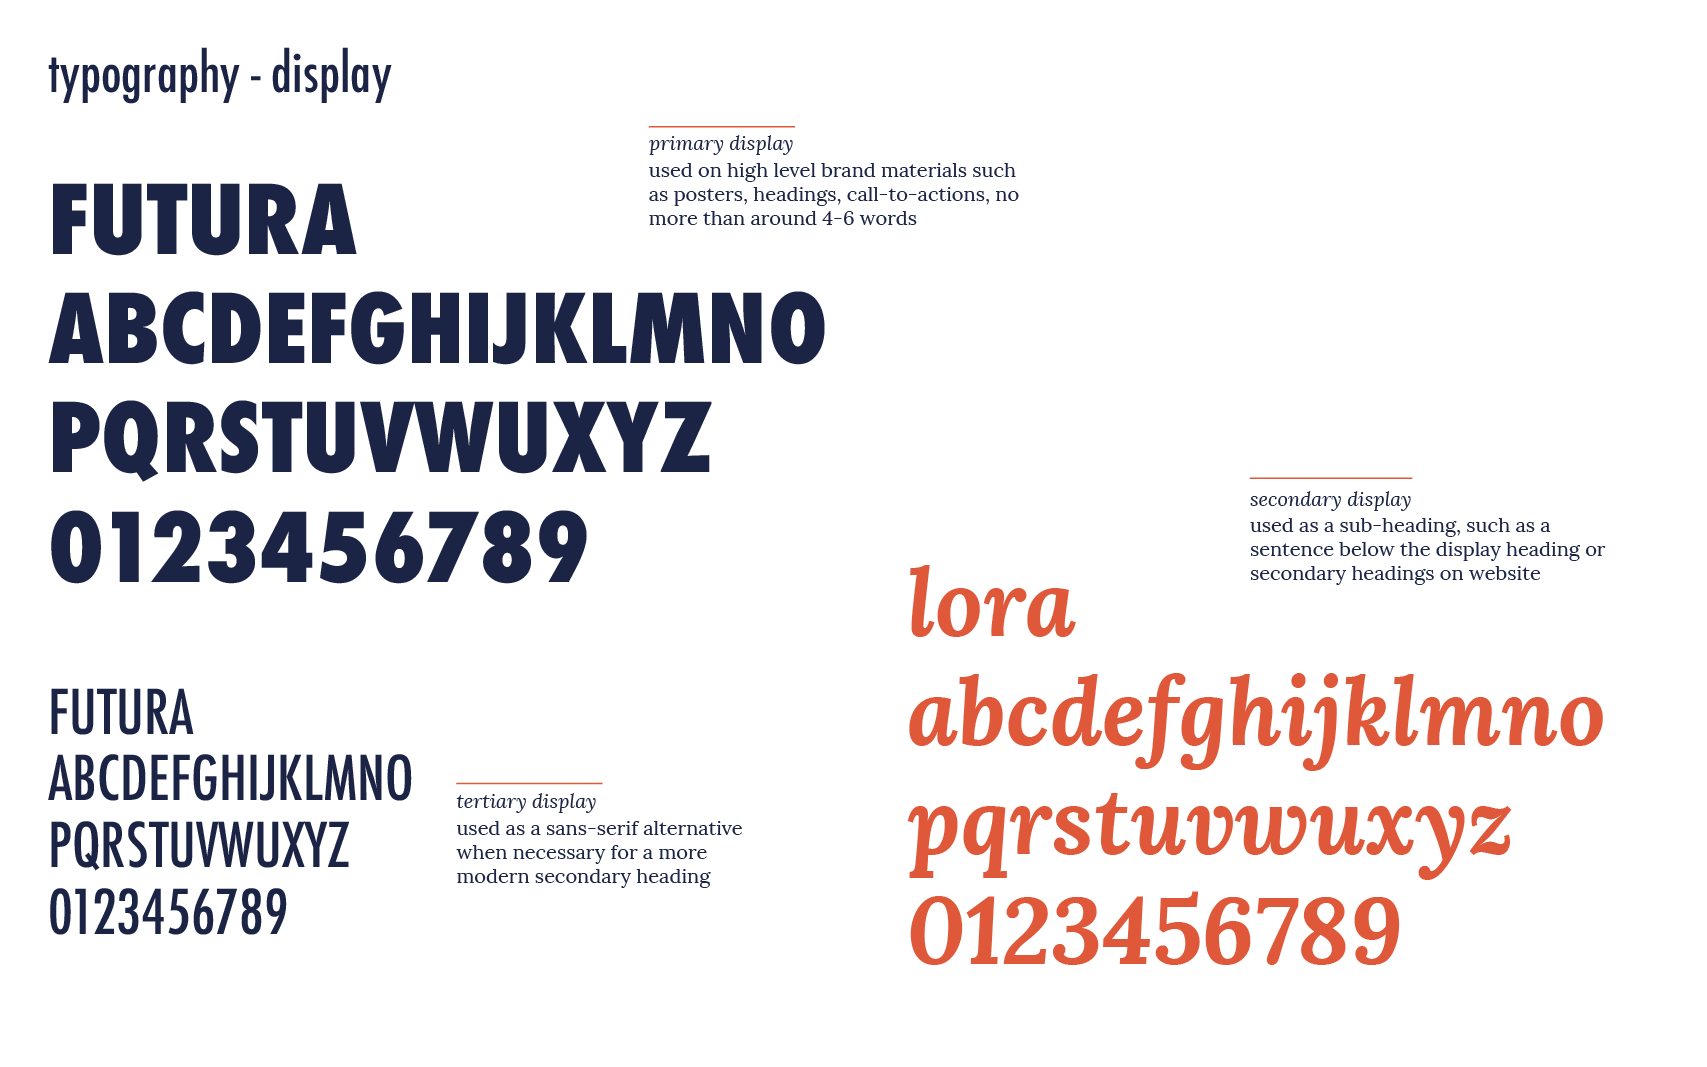 brand guidelines for portfolio5.png